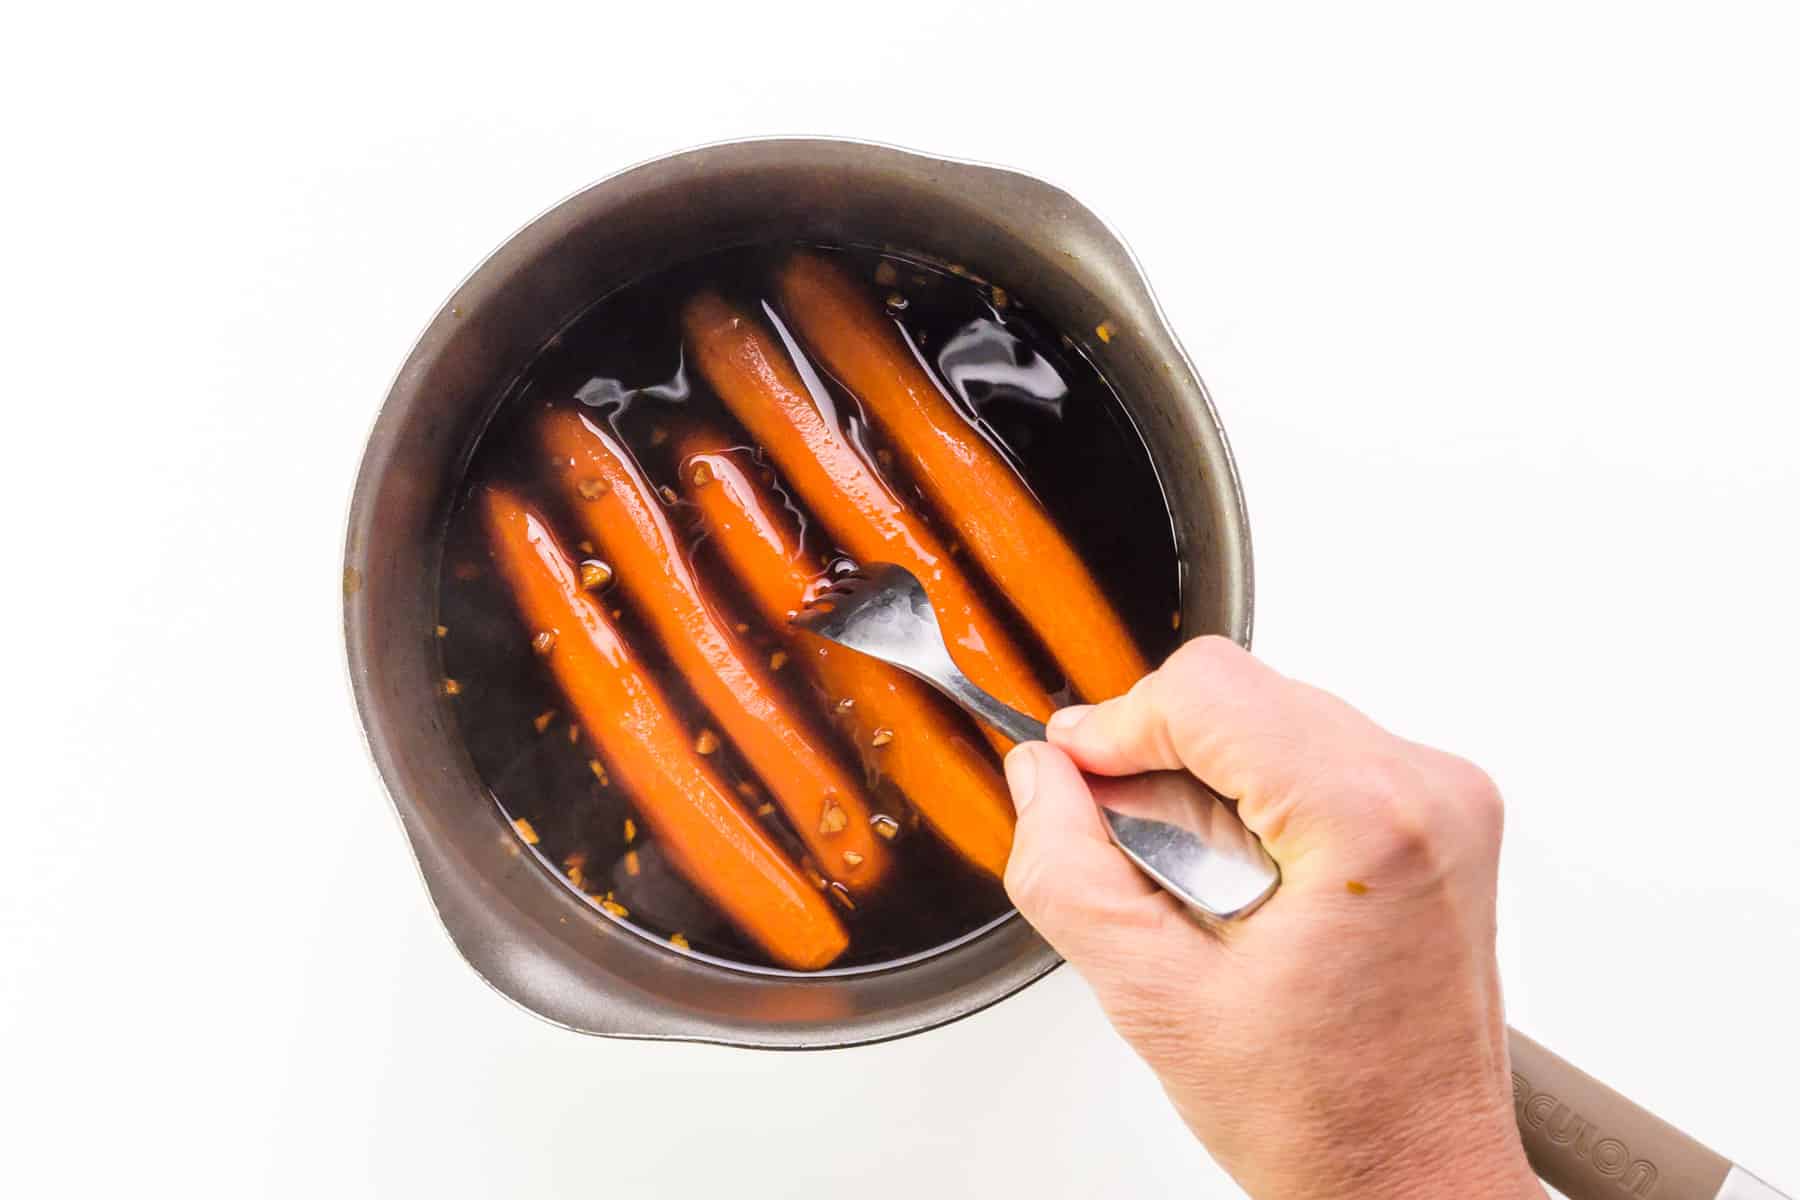 A handholds a fork, pushing it into carrots in a saucepan, testing for doneness.